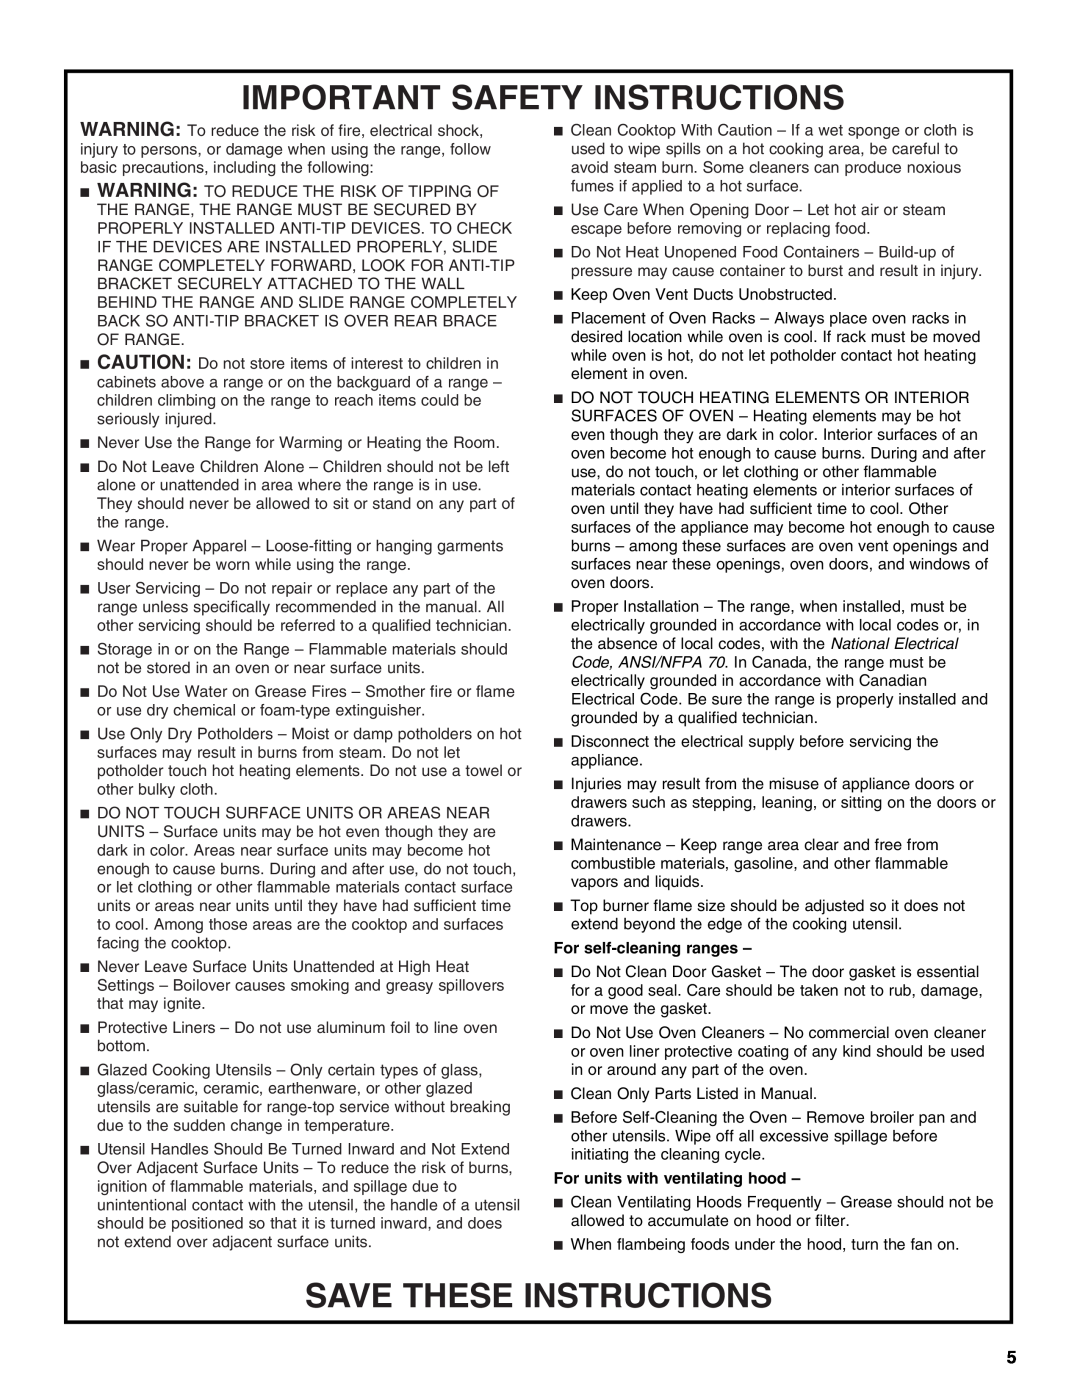 KitchenAid YKDRP767, YKDRP707 manual Important Safety Instructions, Save These Instructions, For self-cleaning ranges 